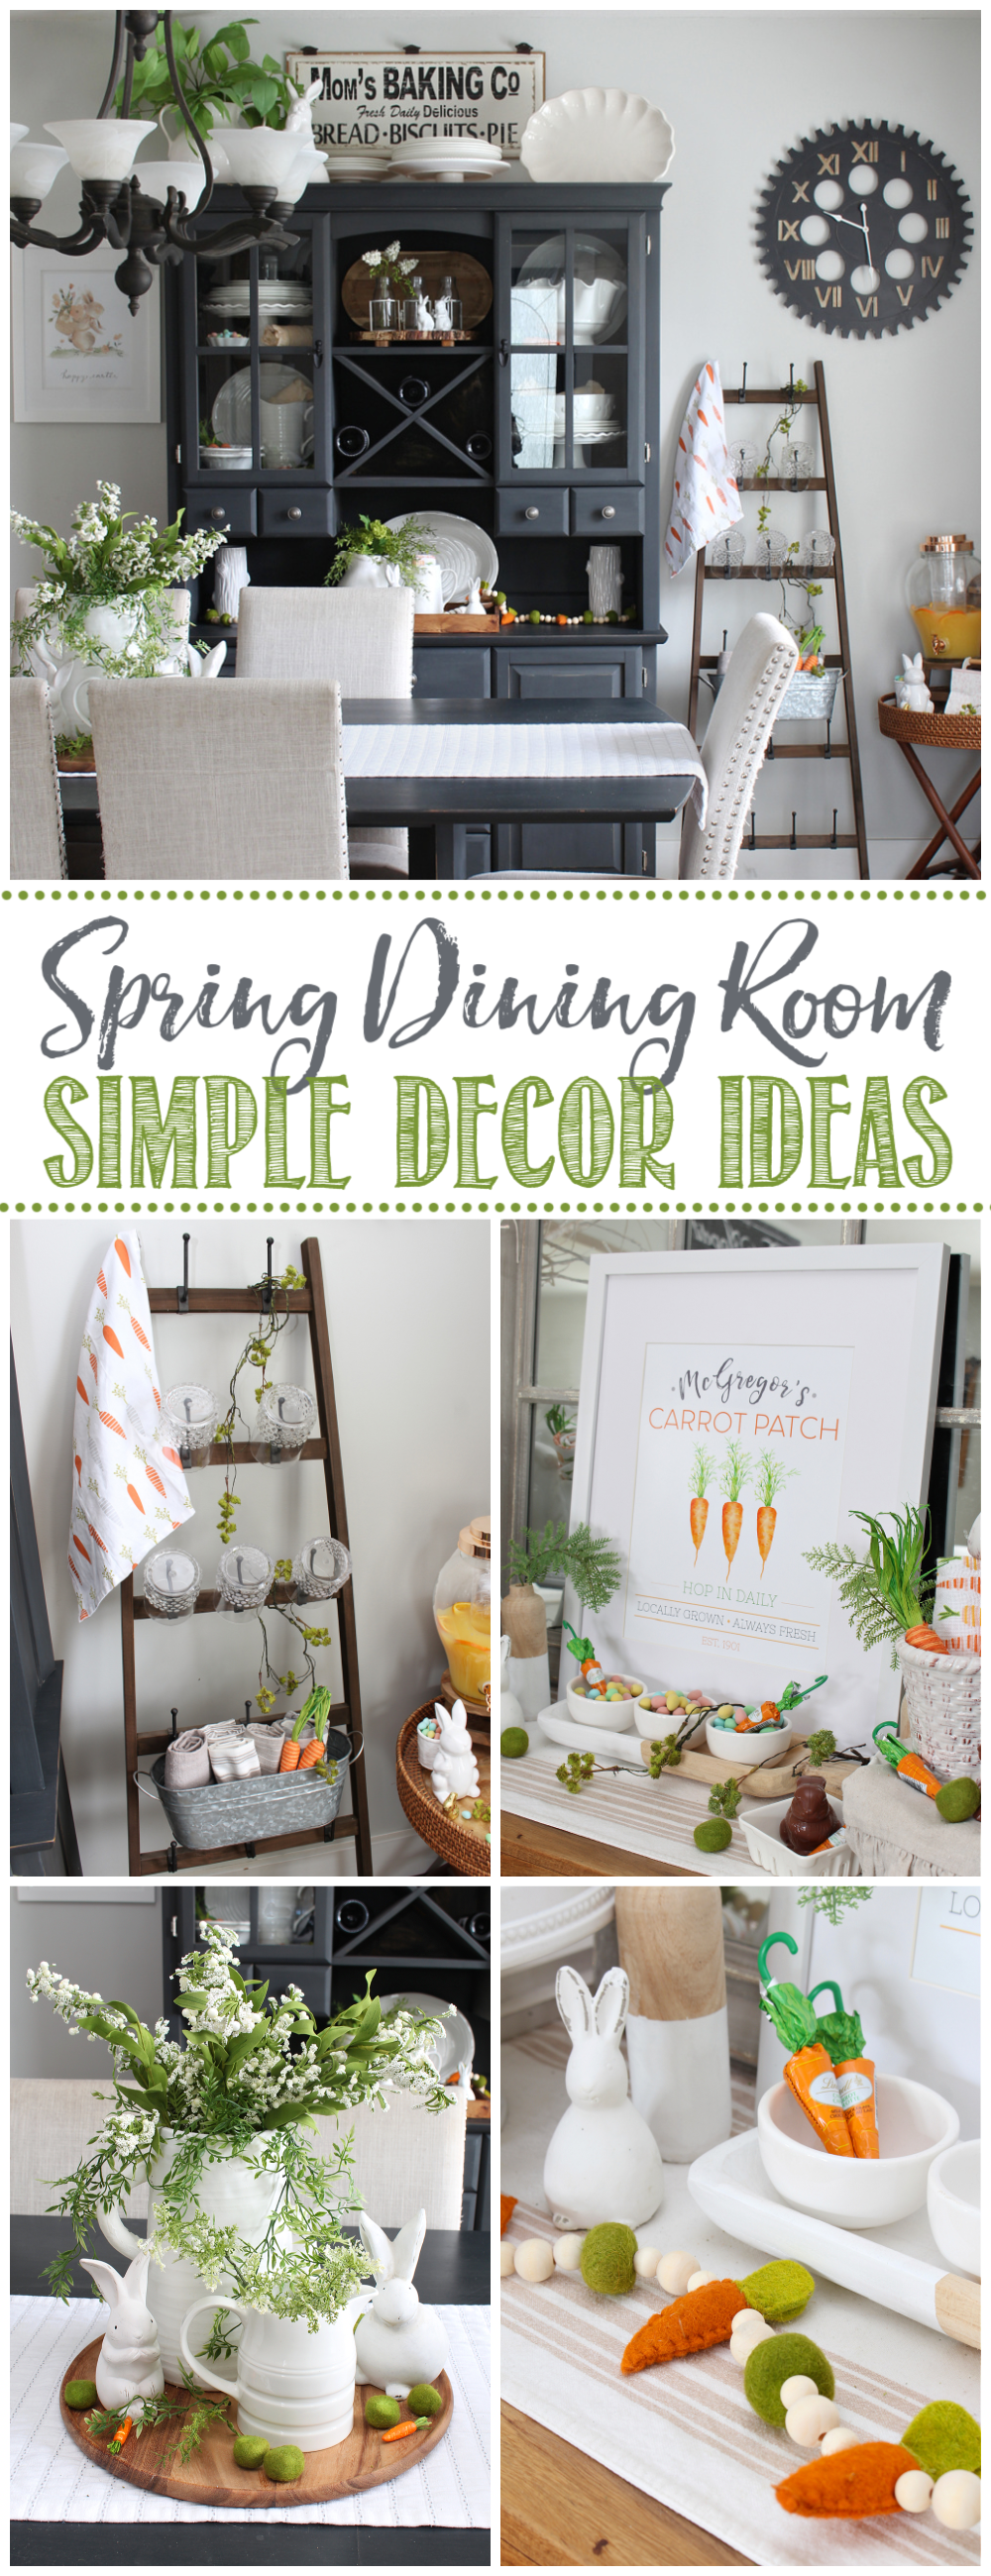 Collage of simple spring decor ideas with a carrot theme.